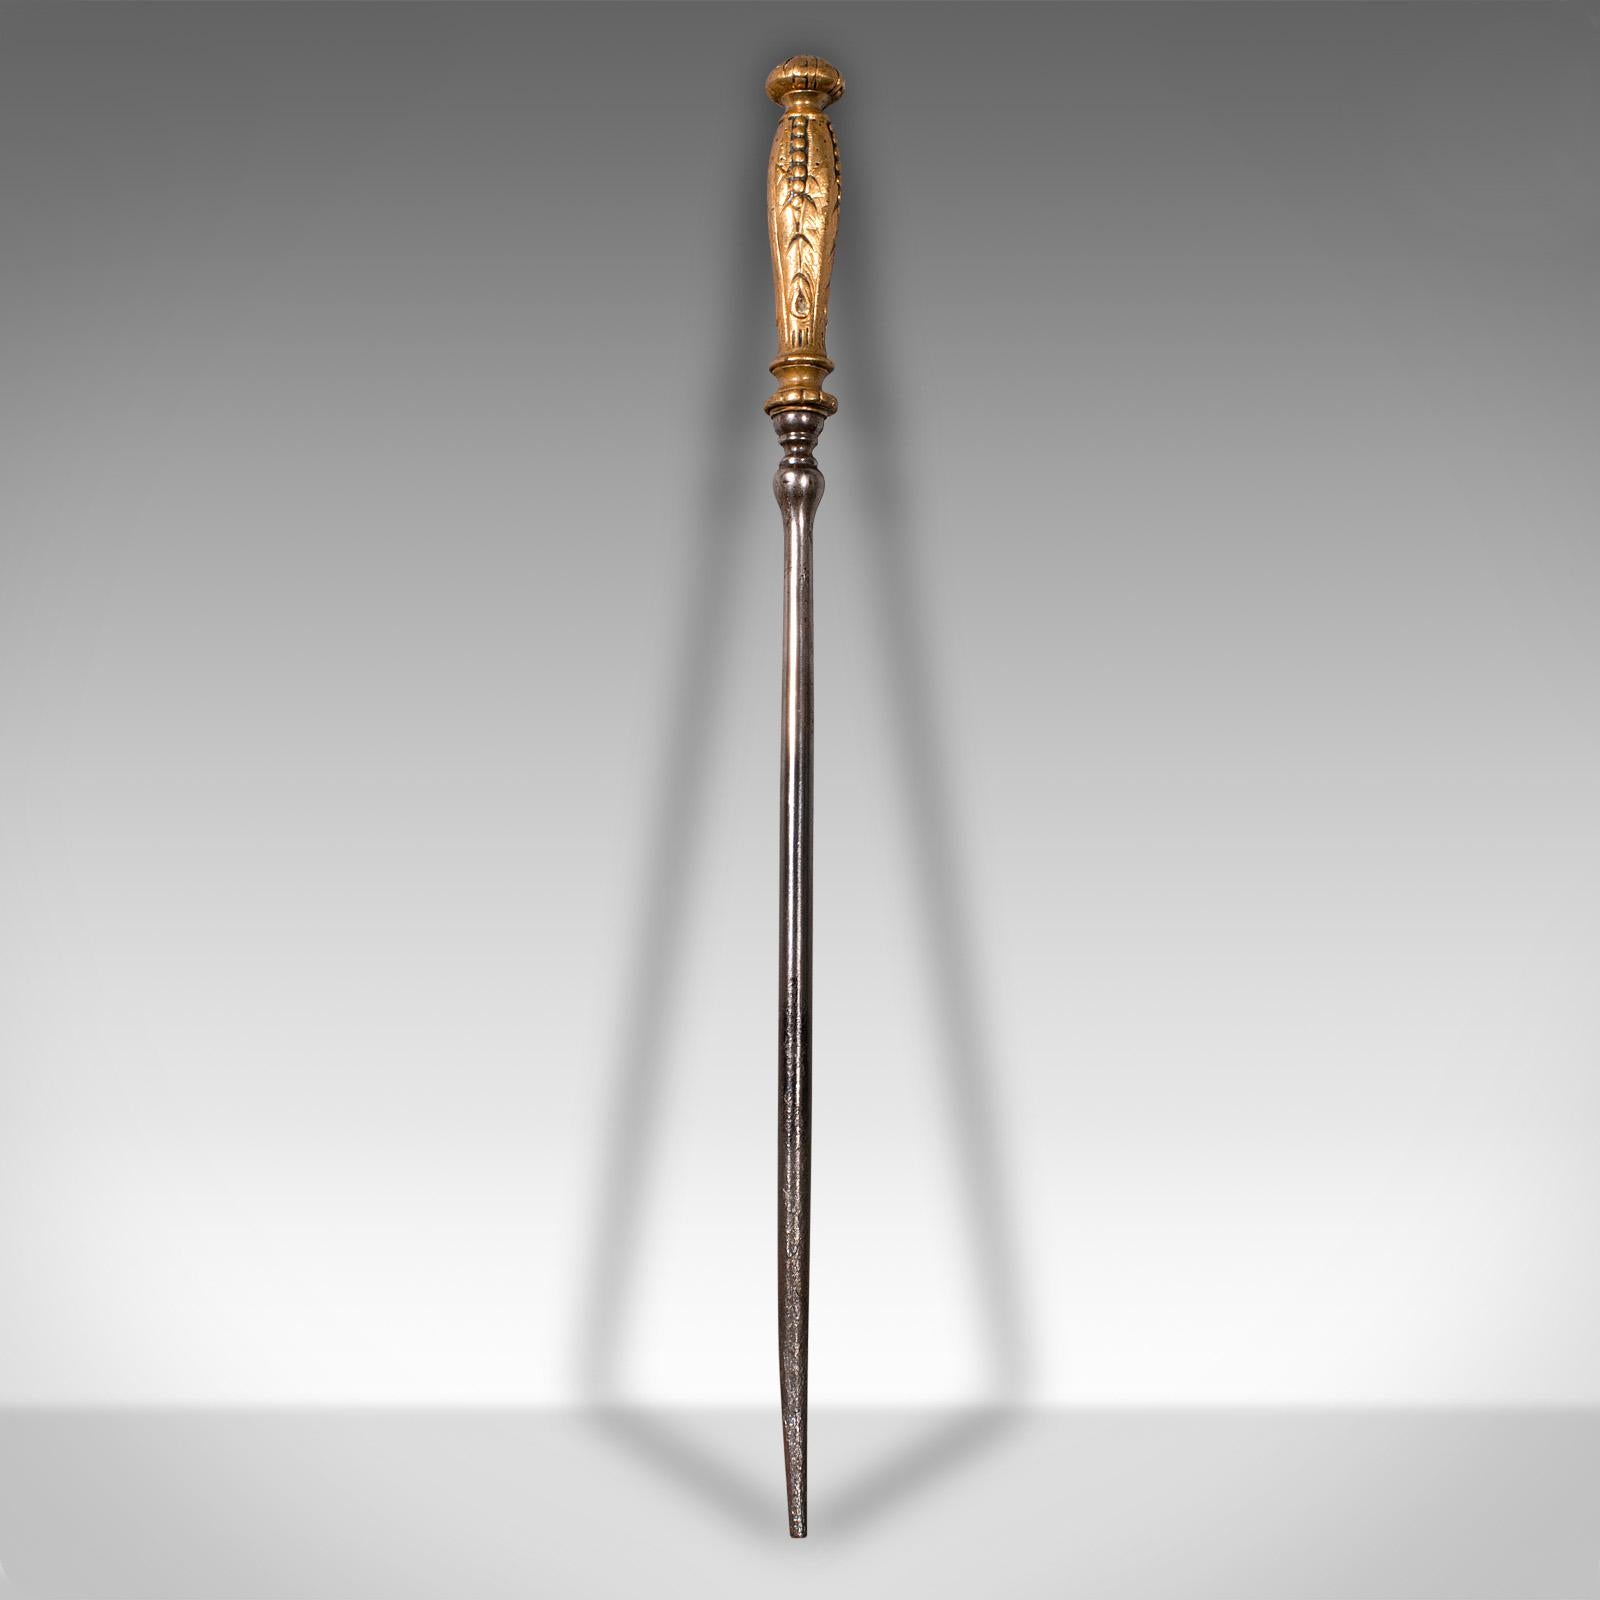 This is a small antique fire poker. An English, cast iron and brass decorative fireside tool, dating to the Georgian period, circa 1800.

Of petite form and beautifully weathered
Displays a desirable aged patina and in good original